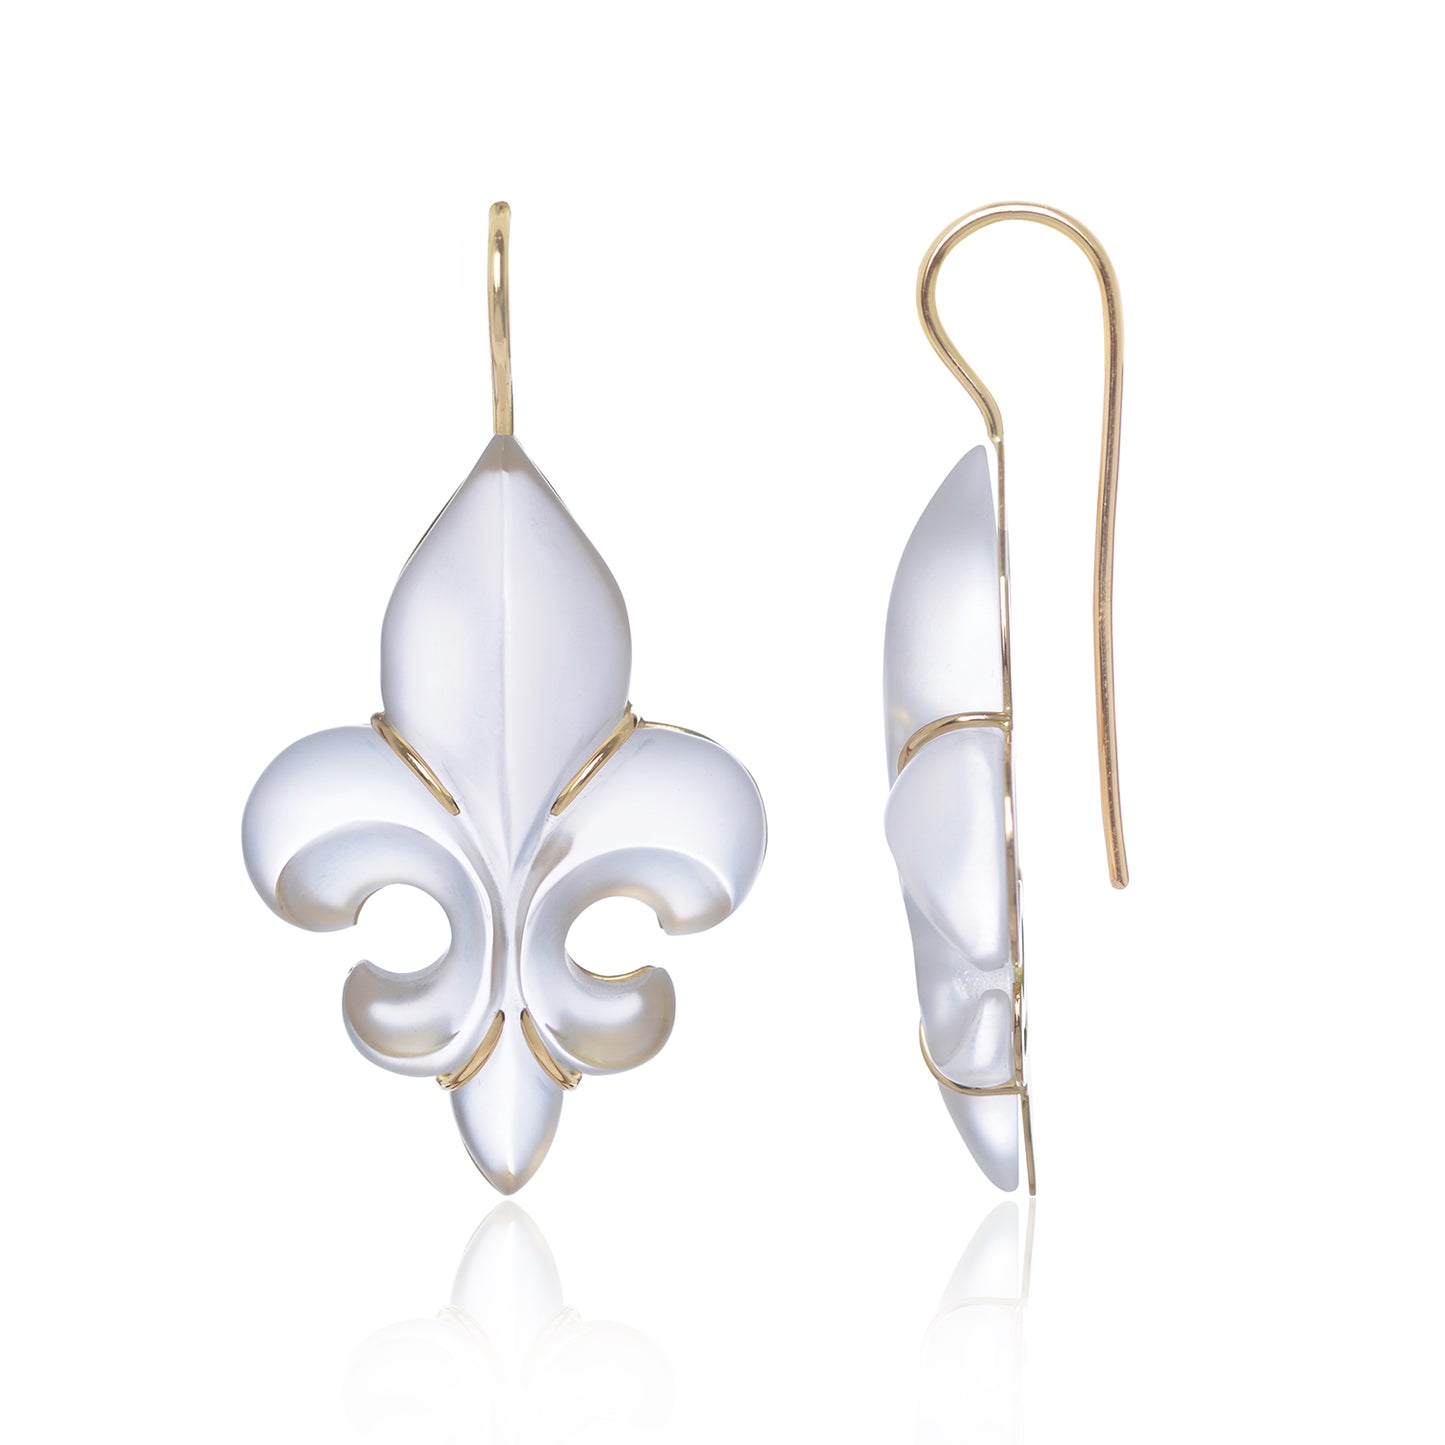 Frosted Fleur des Lys Earrings in 18ct yellow gold side view by McFarlane Fine Jewellery